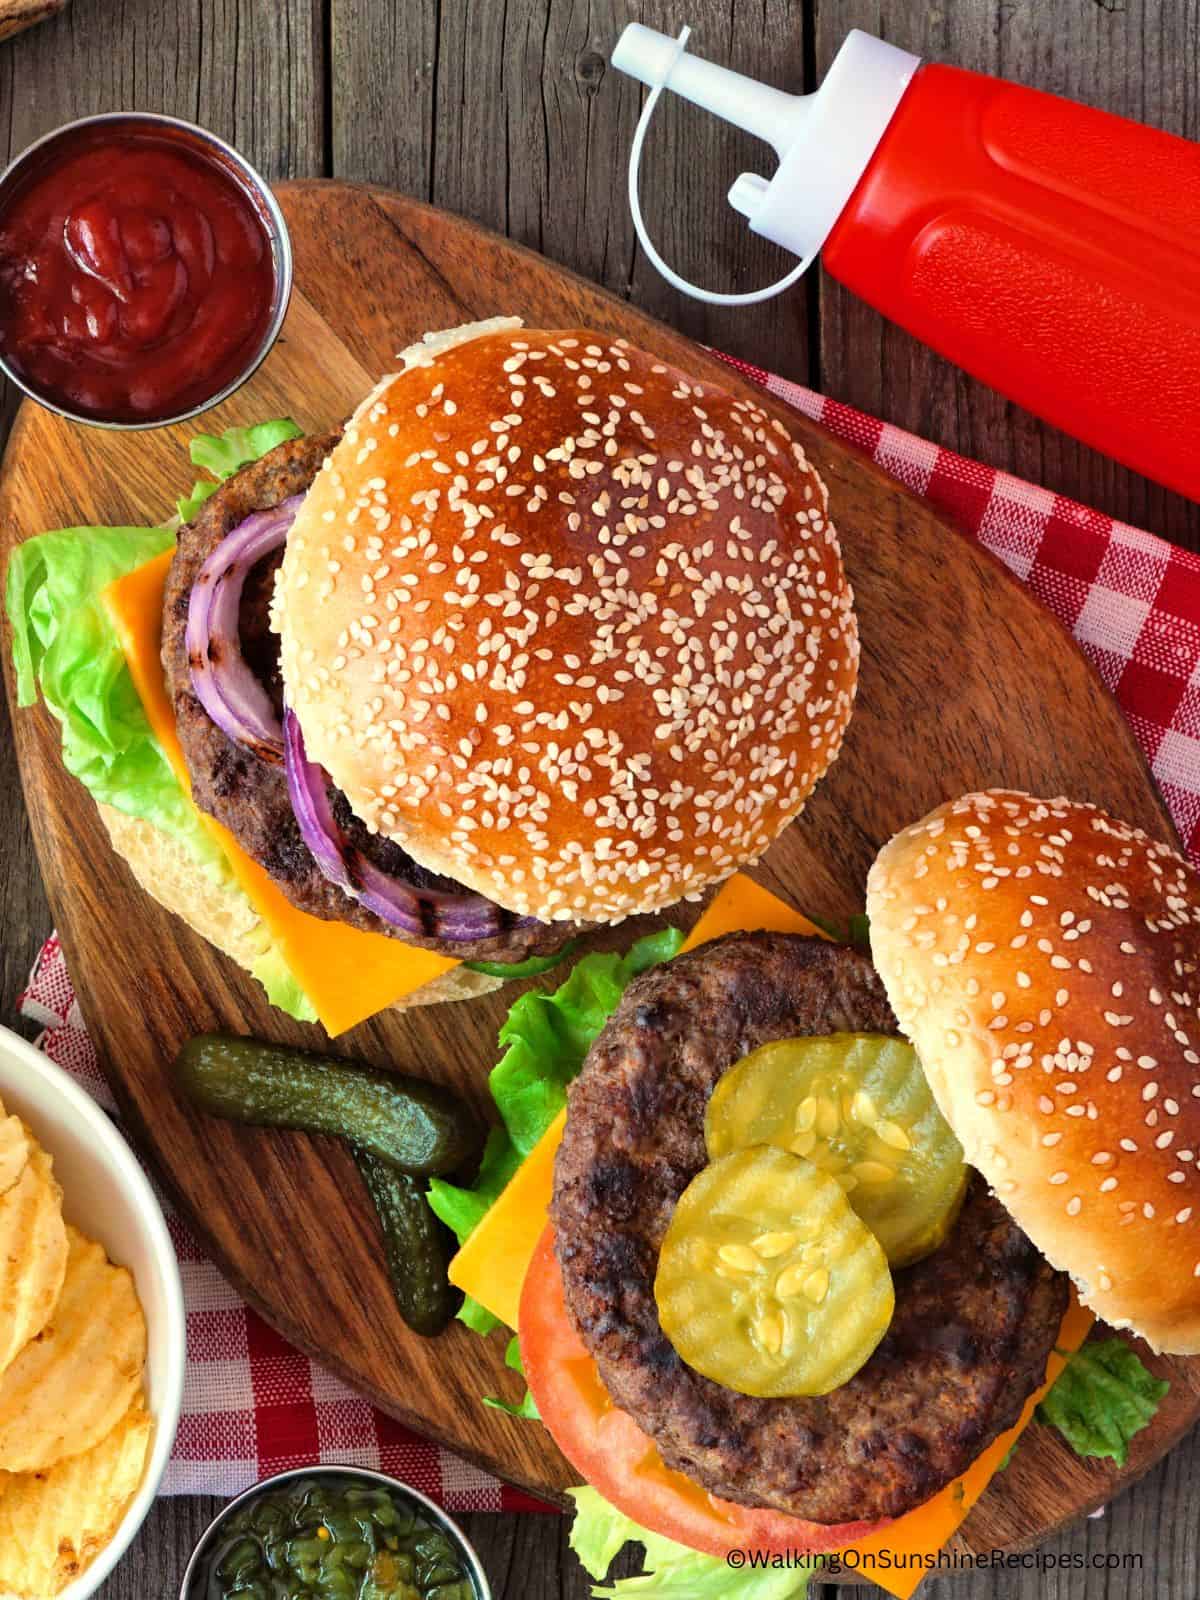 hamburgers with toppings on cutting board and red checked napkin.